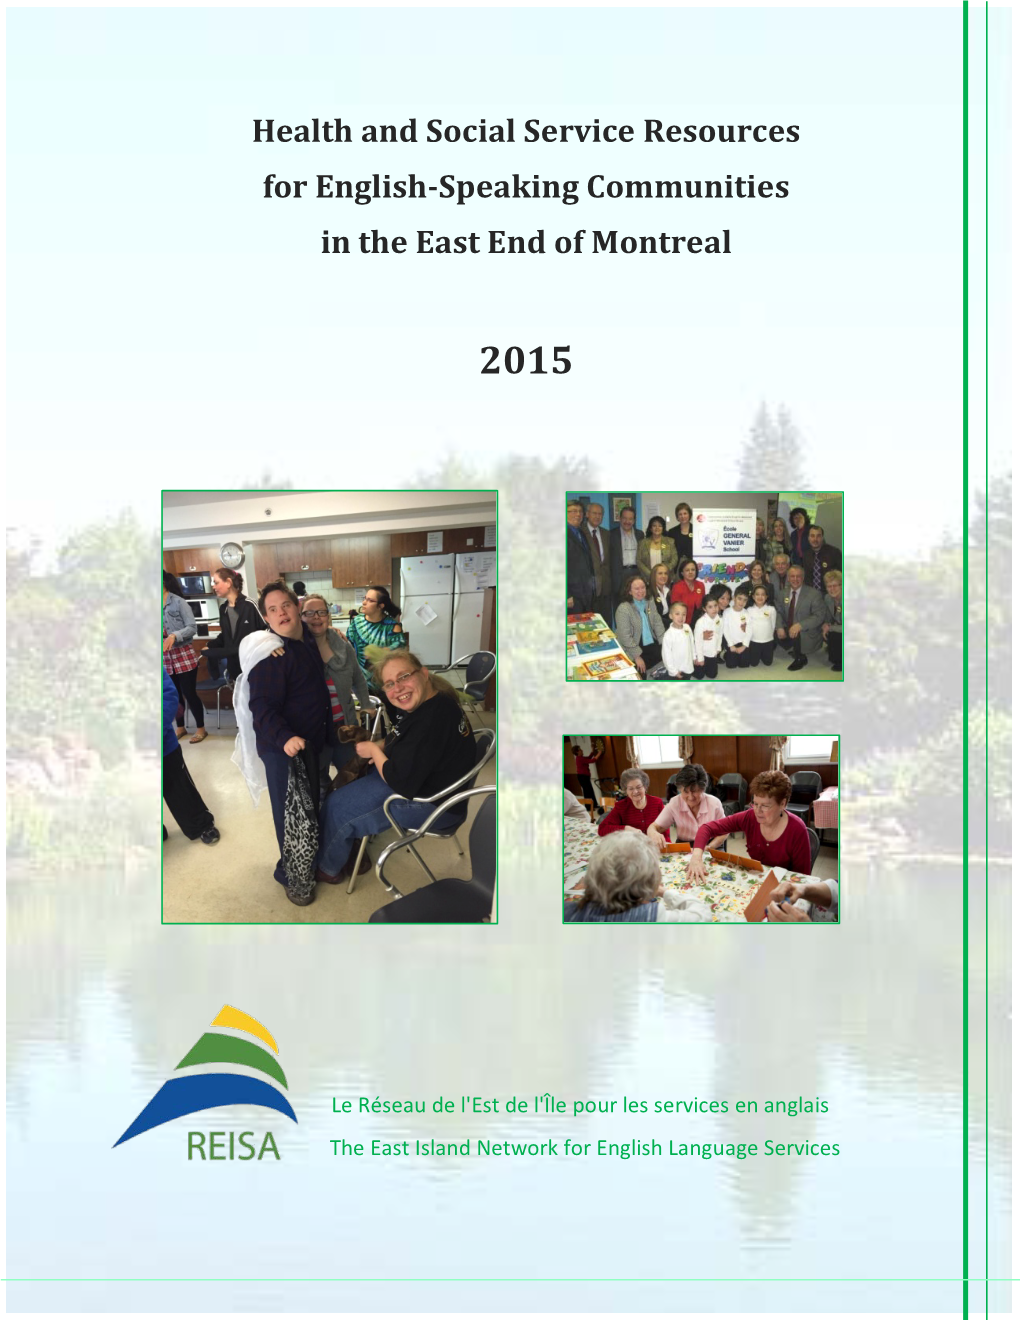 Health and Social Service Resources for English-Speaking Communities in the East End of Montreal